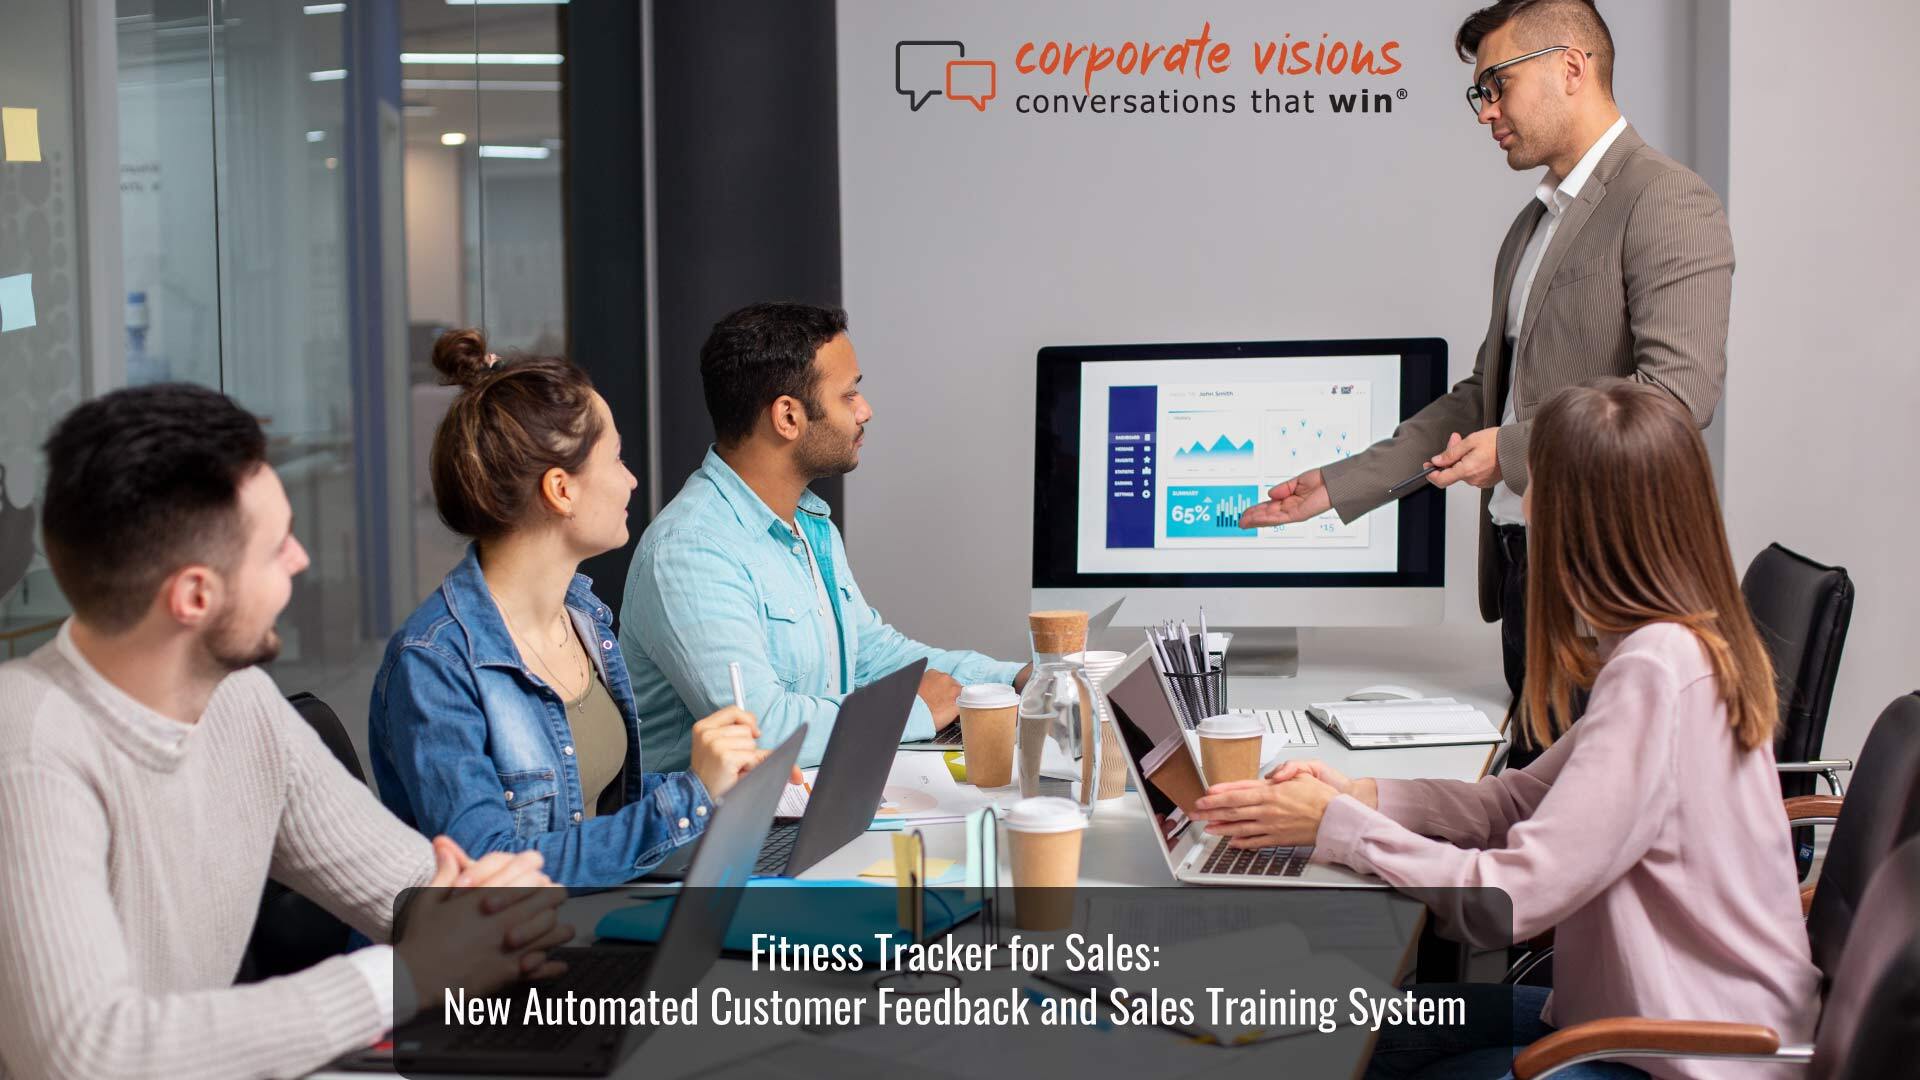 Fitness Tracker for Sales: New Automated Customer Feedback and Sales Training System to Radically Transform Sales Rep Coaching and Improvement